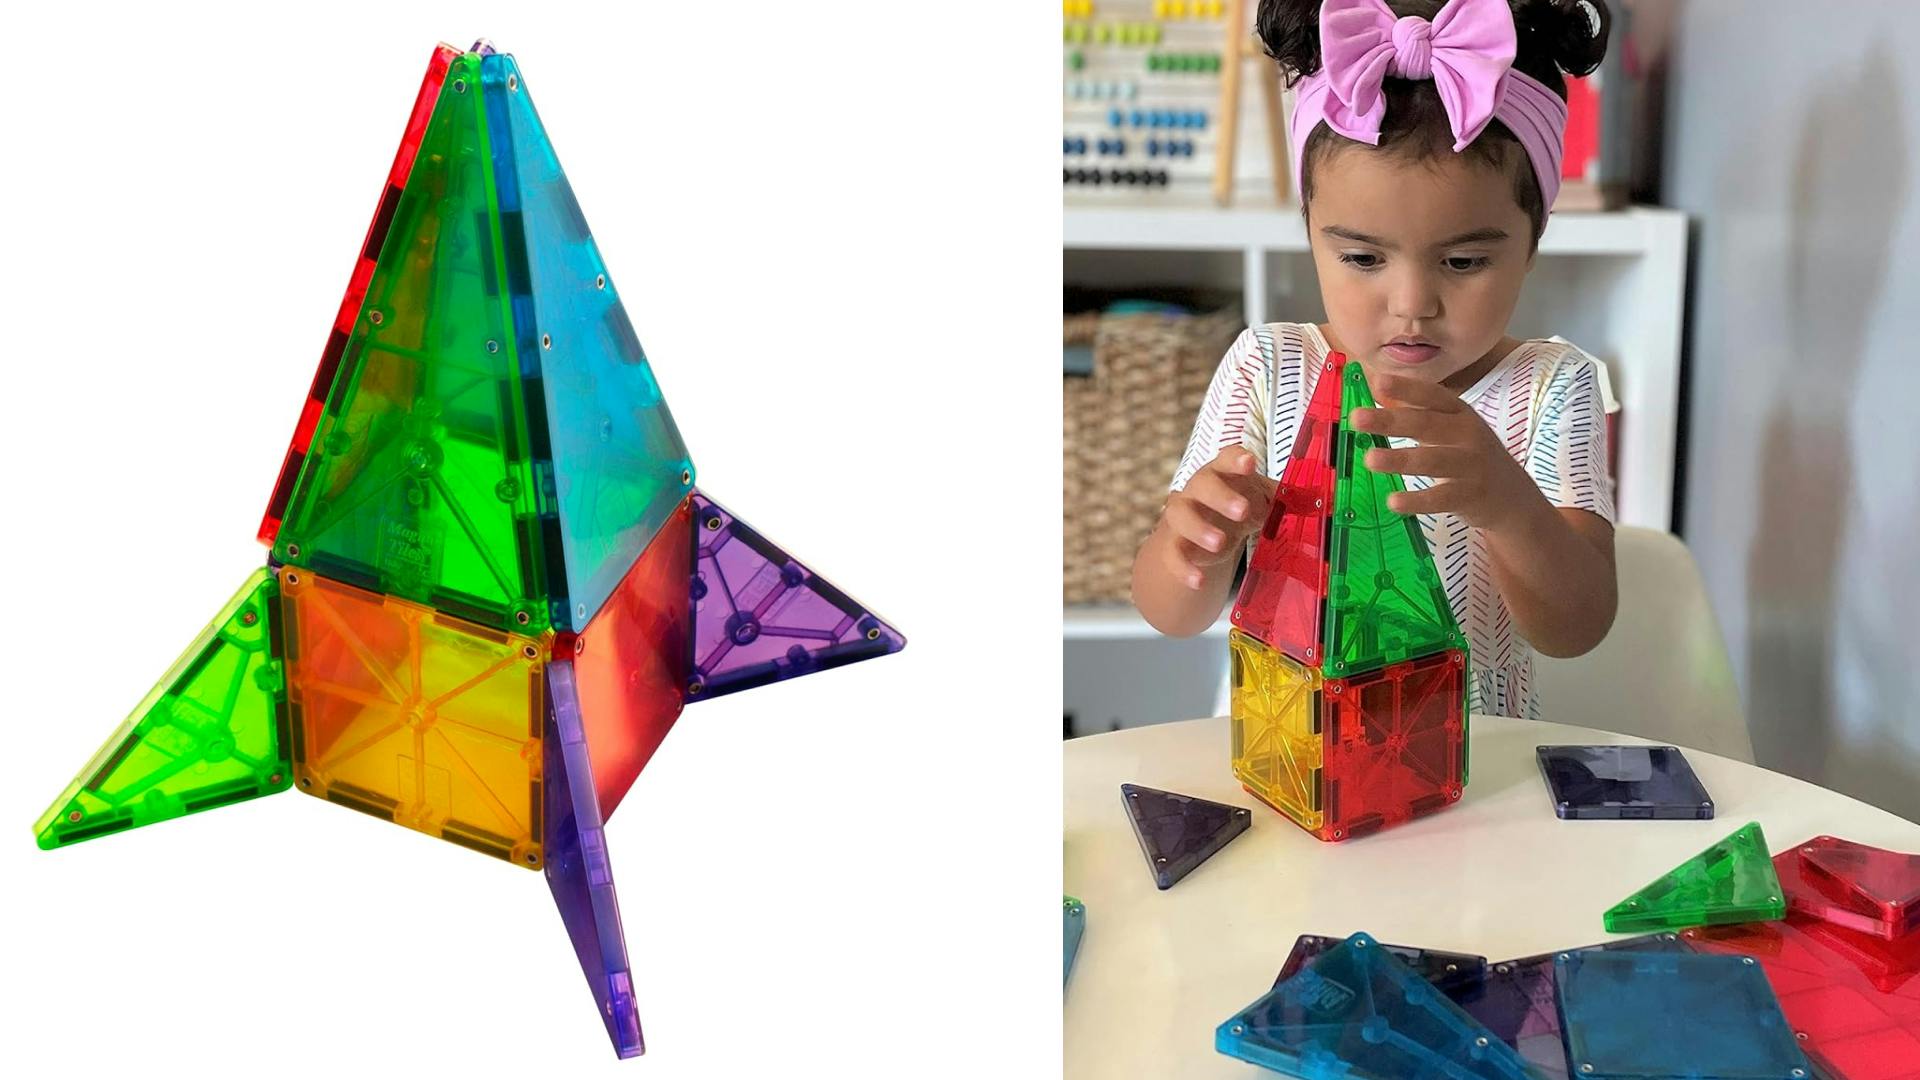 colored magnetic tiles for kids that stick together to build with